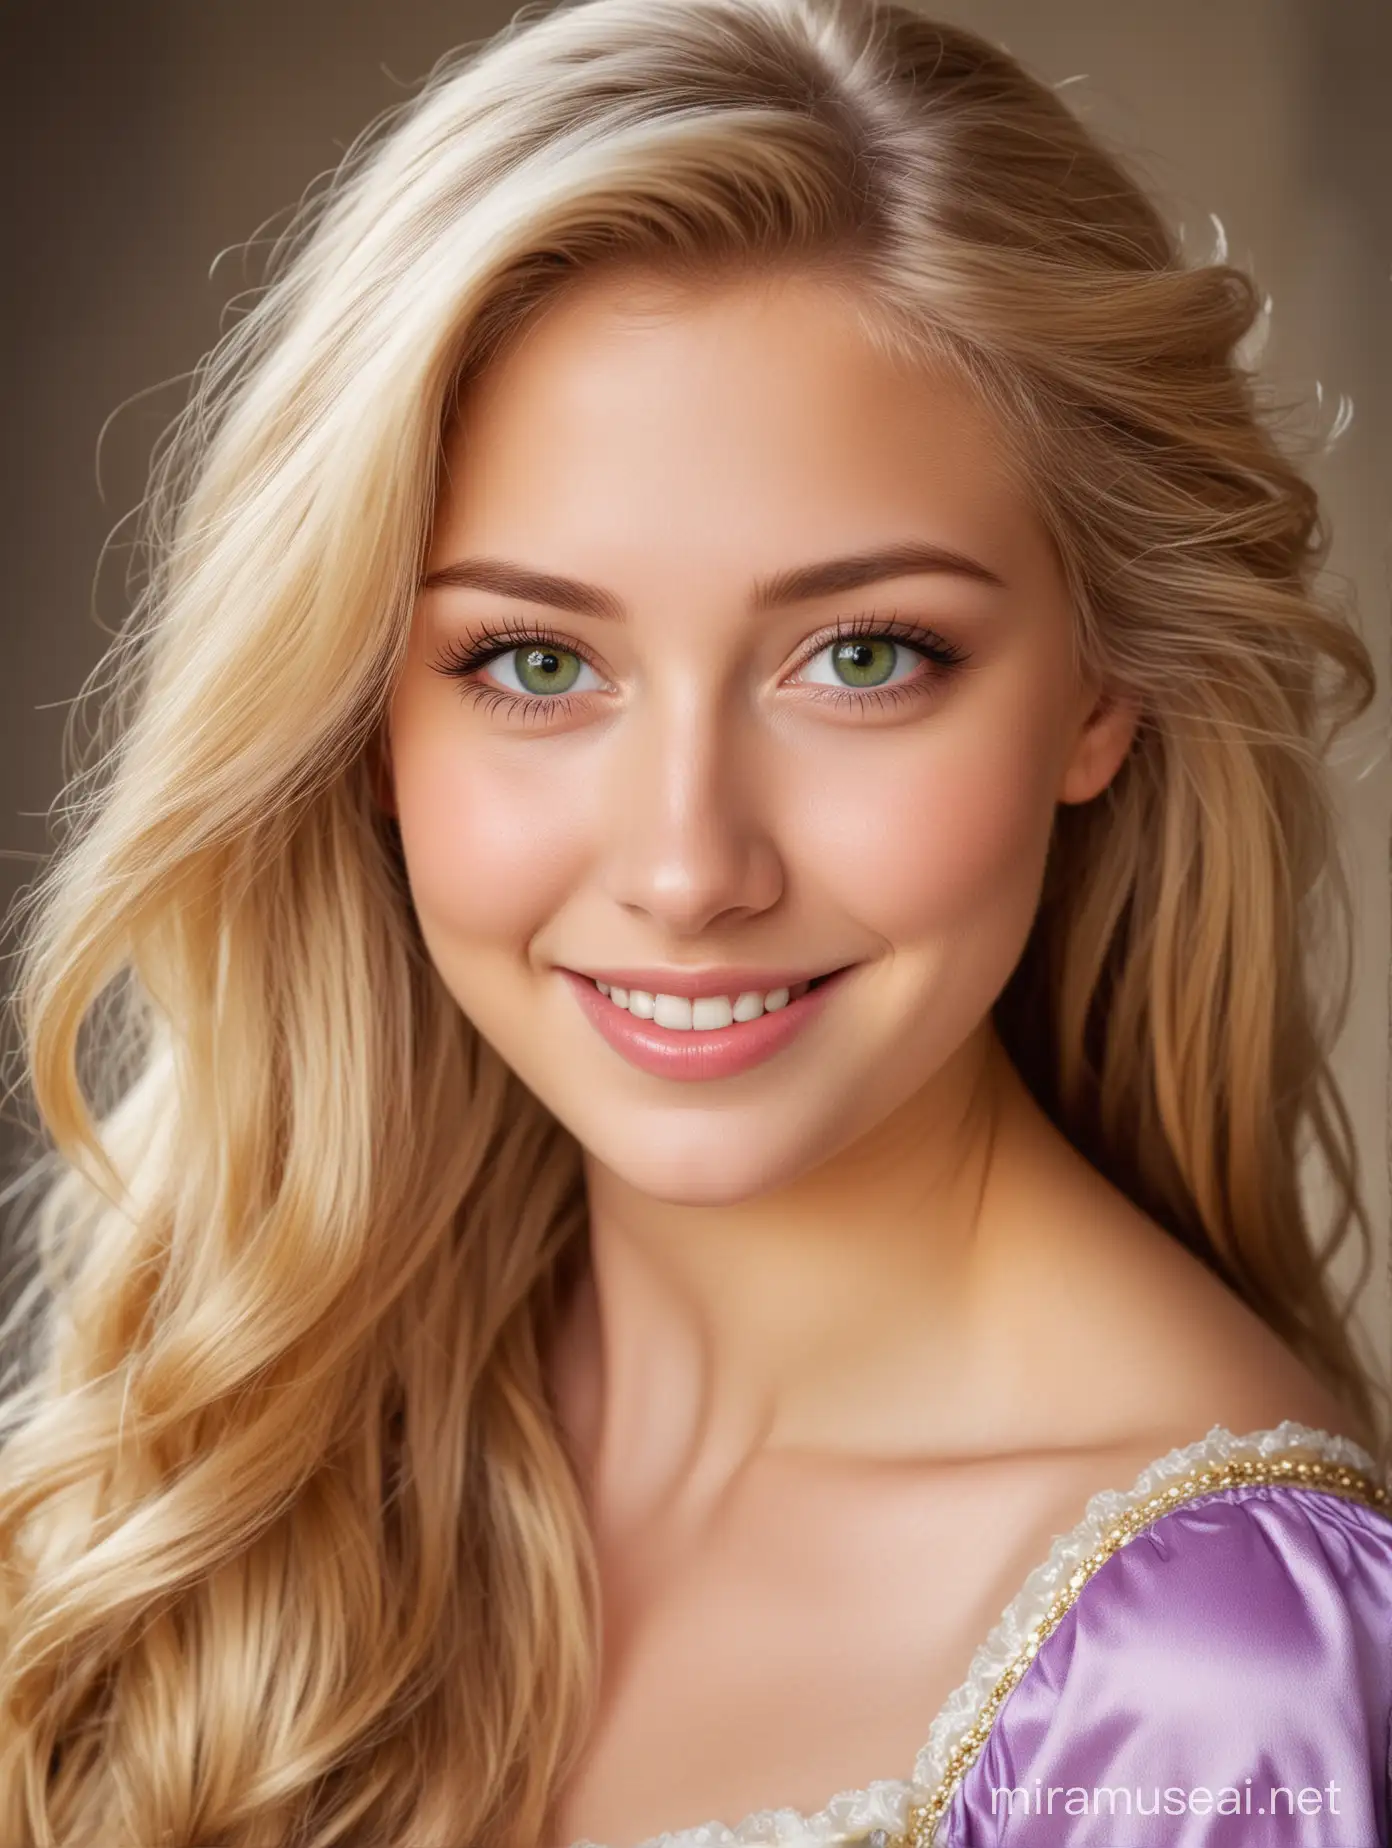 Smiling Teen Princess Rapunzel Portrait with Blonde Hair and Green Eyes